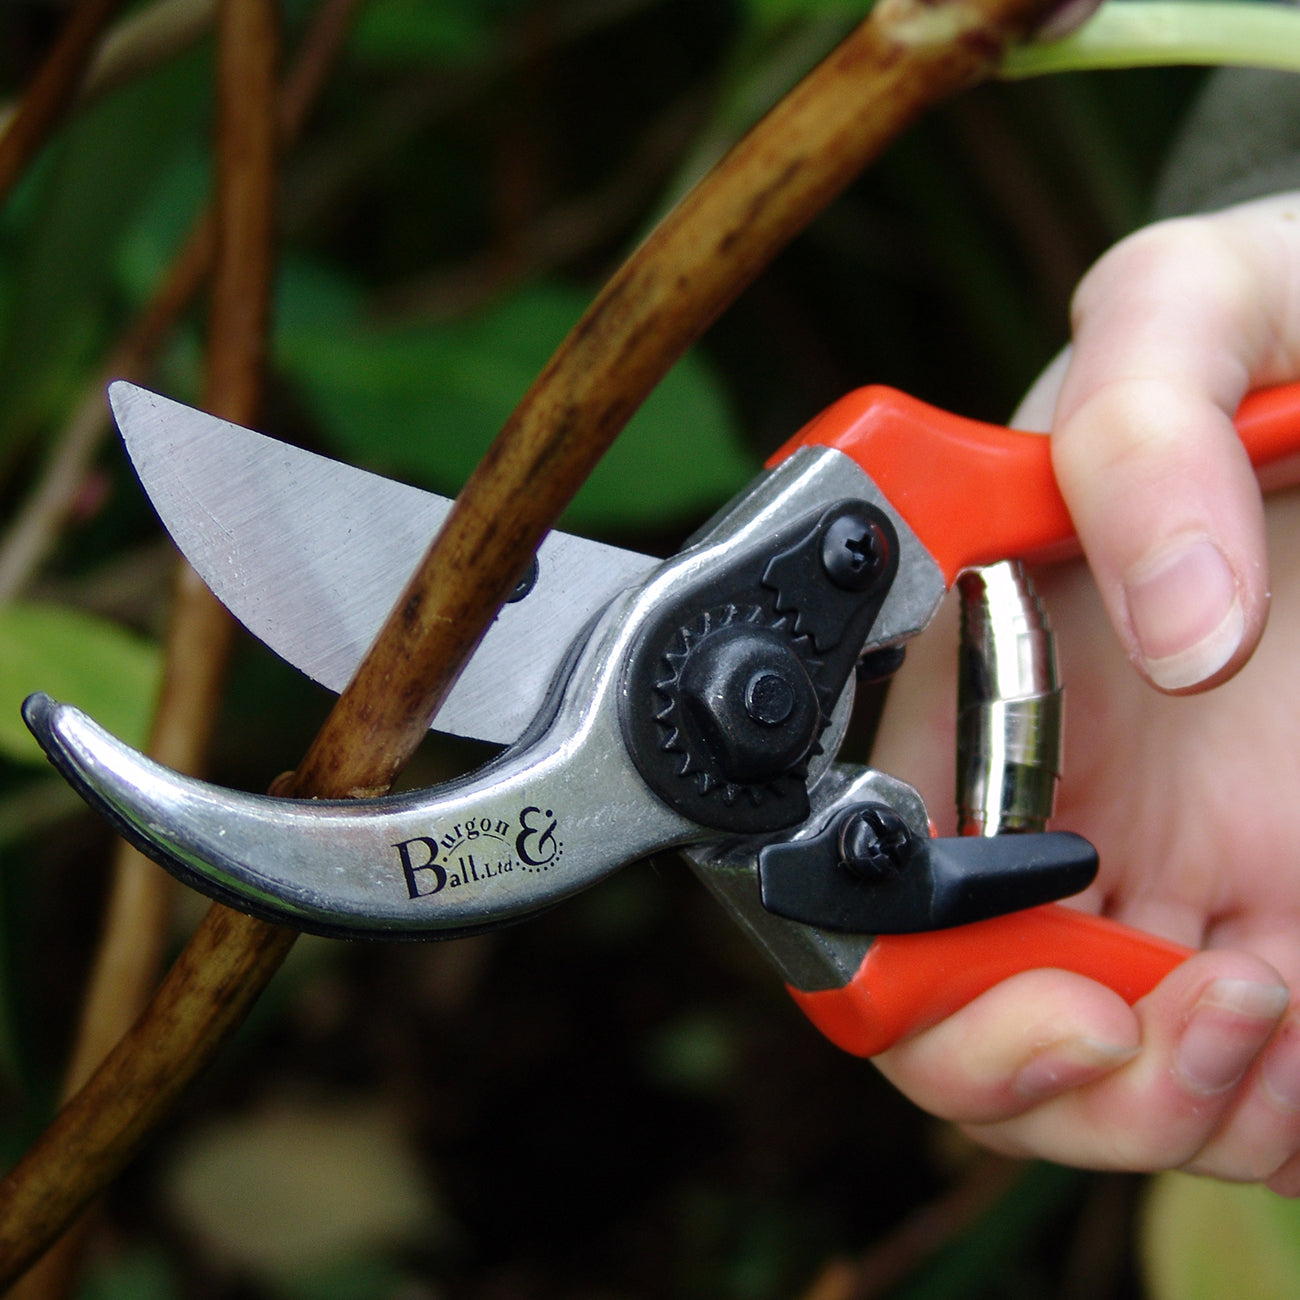 Gardening with Burgon & Ball RHS-Endorsed Bypass Secateurs